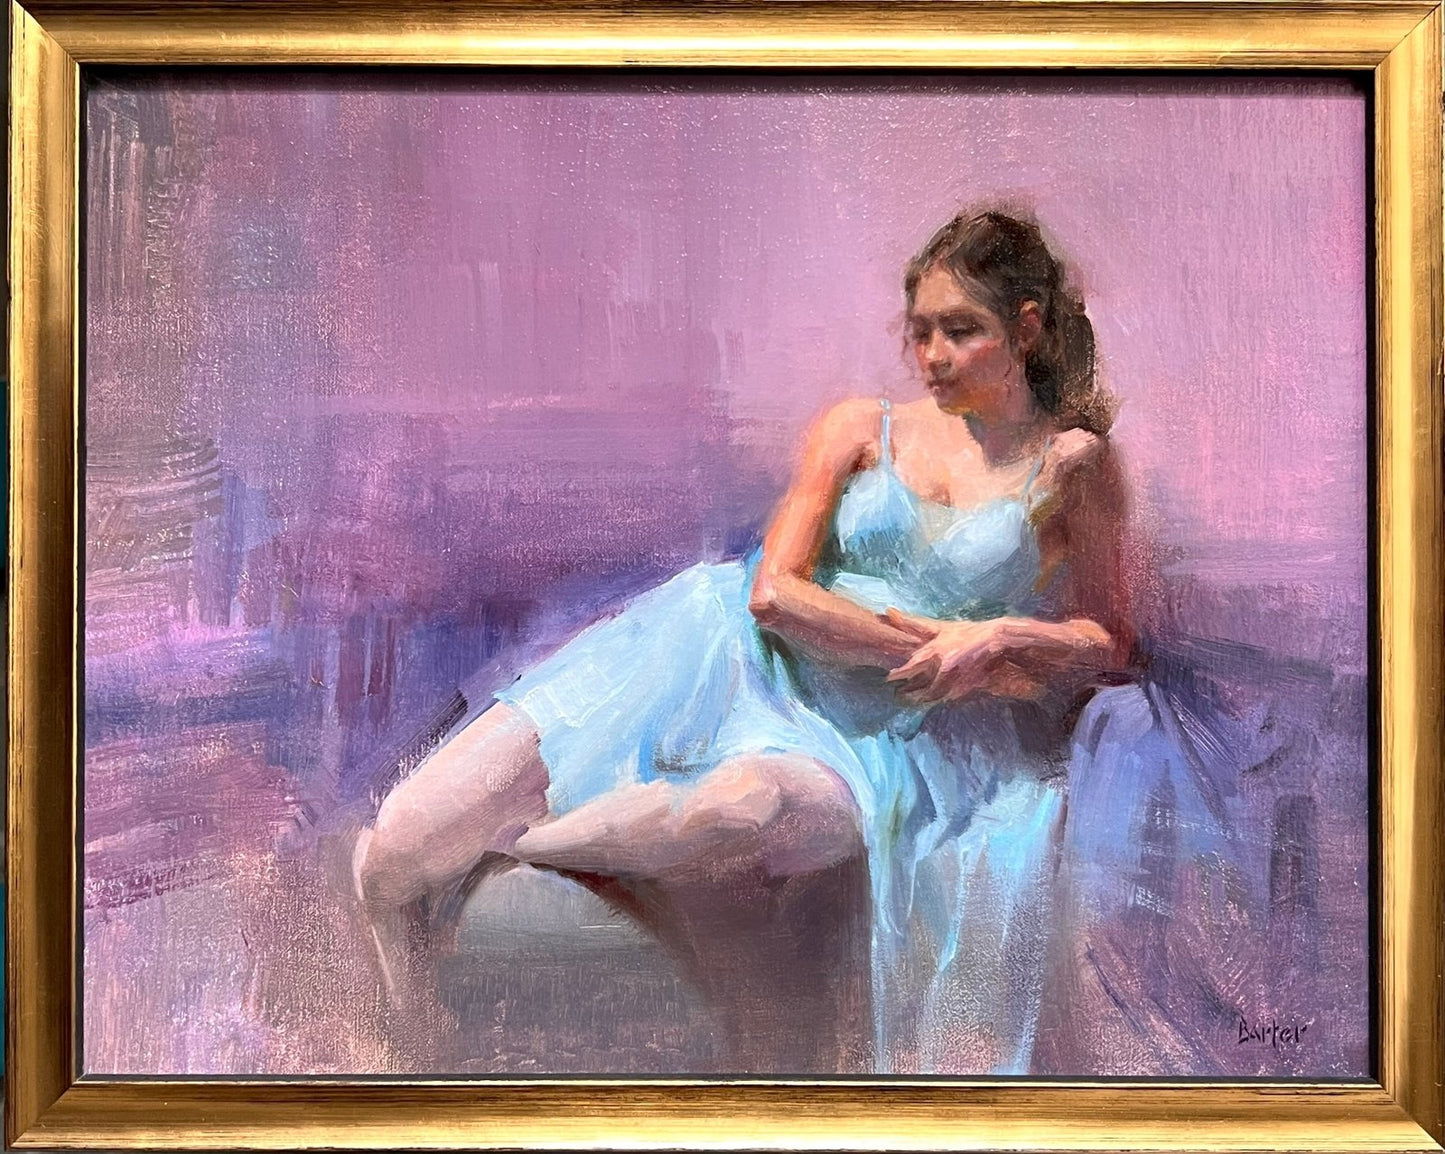 Hues of Blue and Violet by Stacy Barter at LePrince Galleries